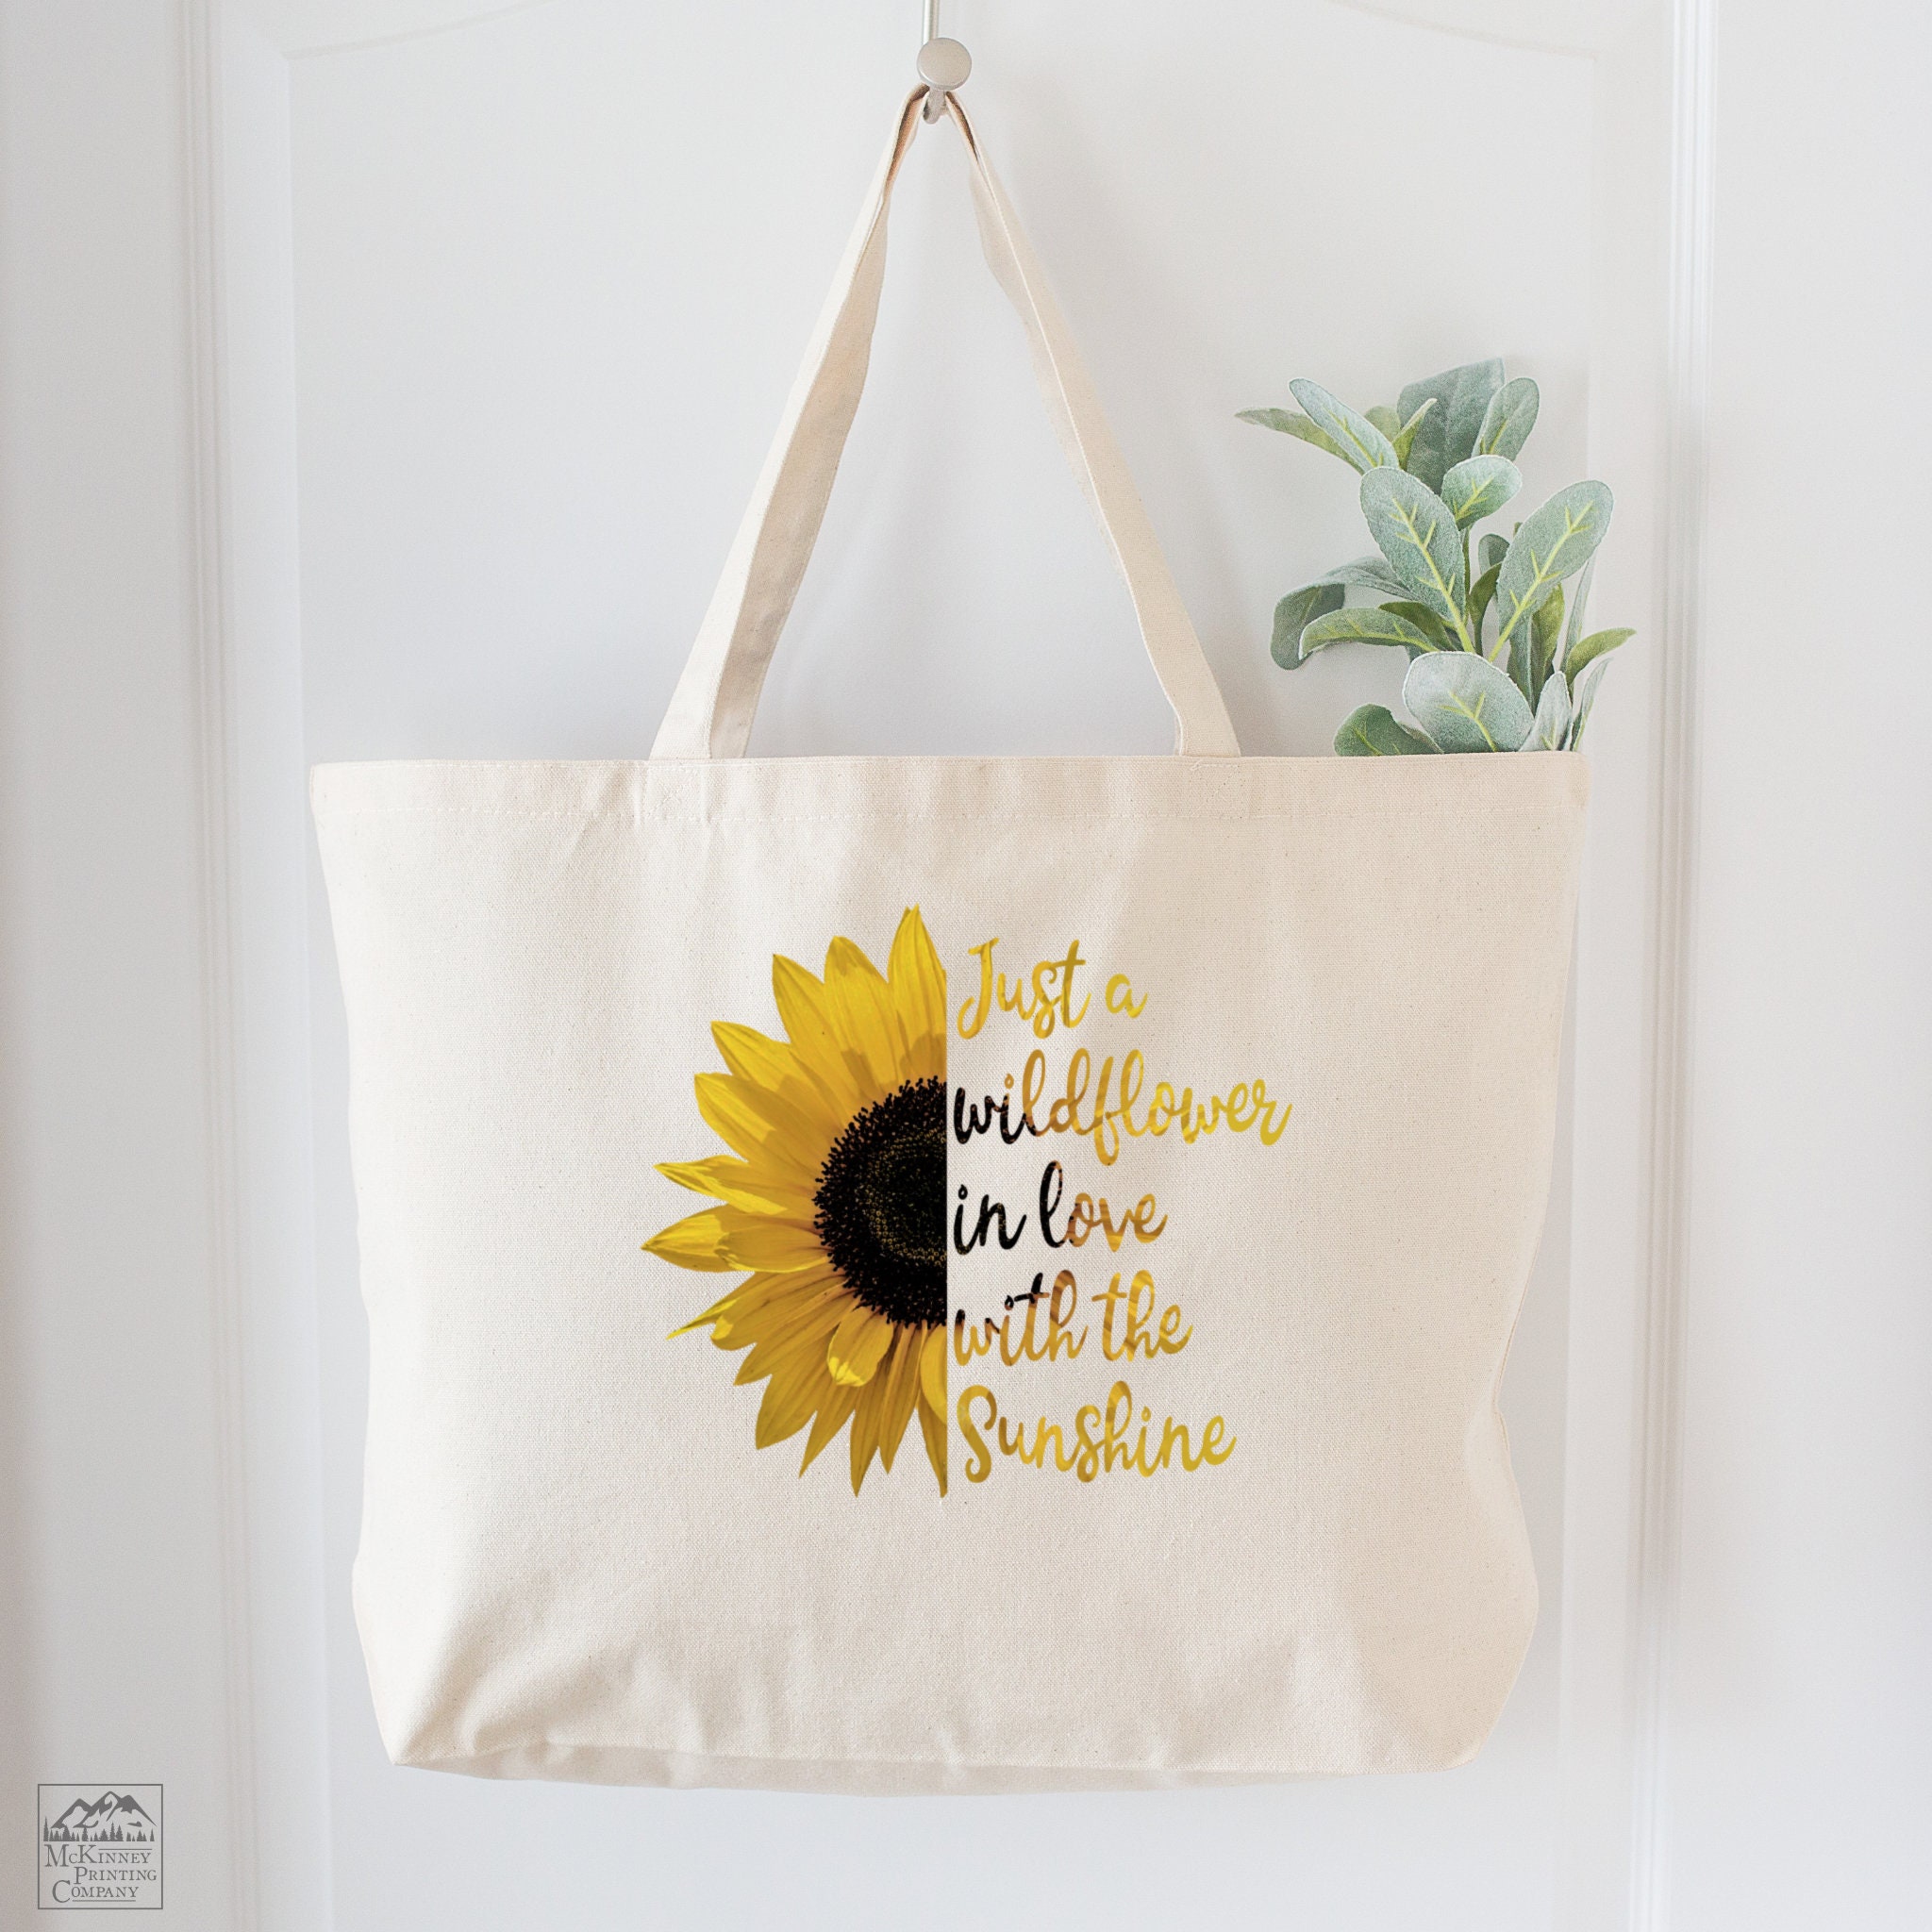 Crochet a Sunflower Tote Bag with Claudia Zilstra - Scugog Council for the  Arts